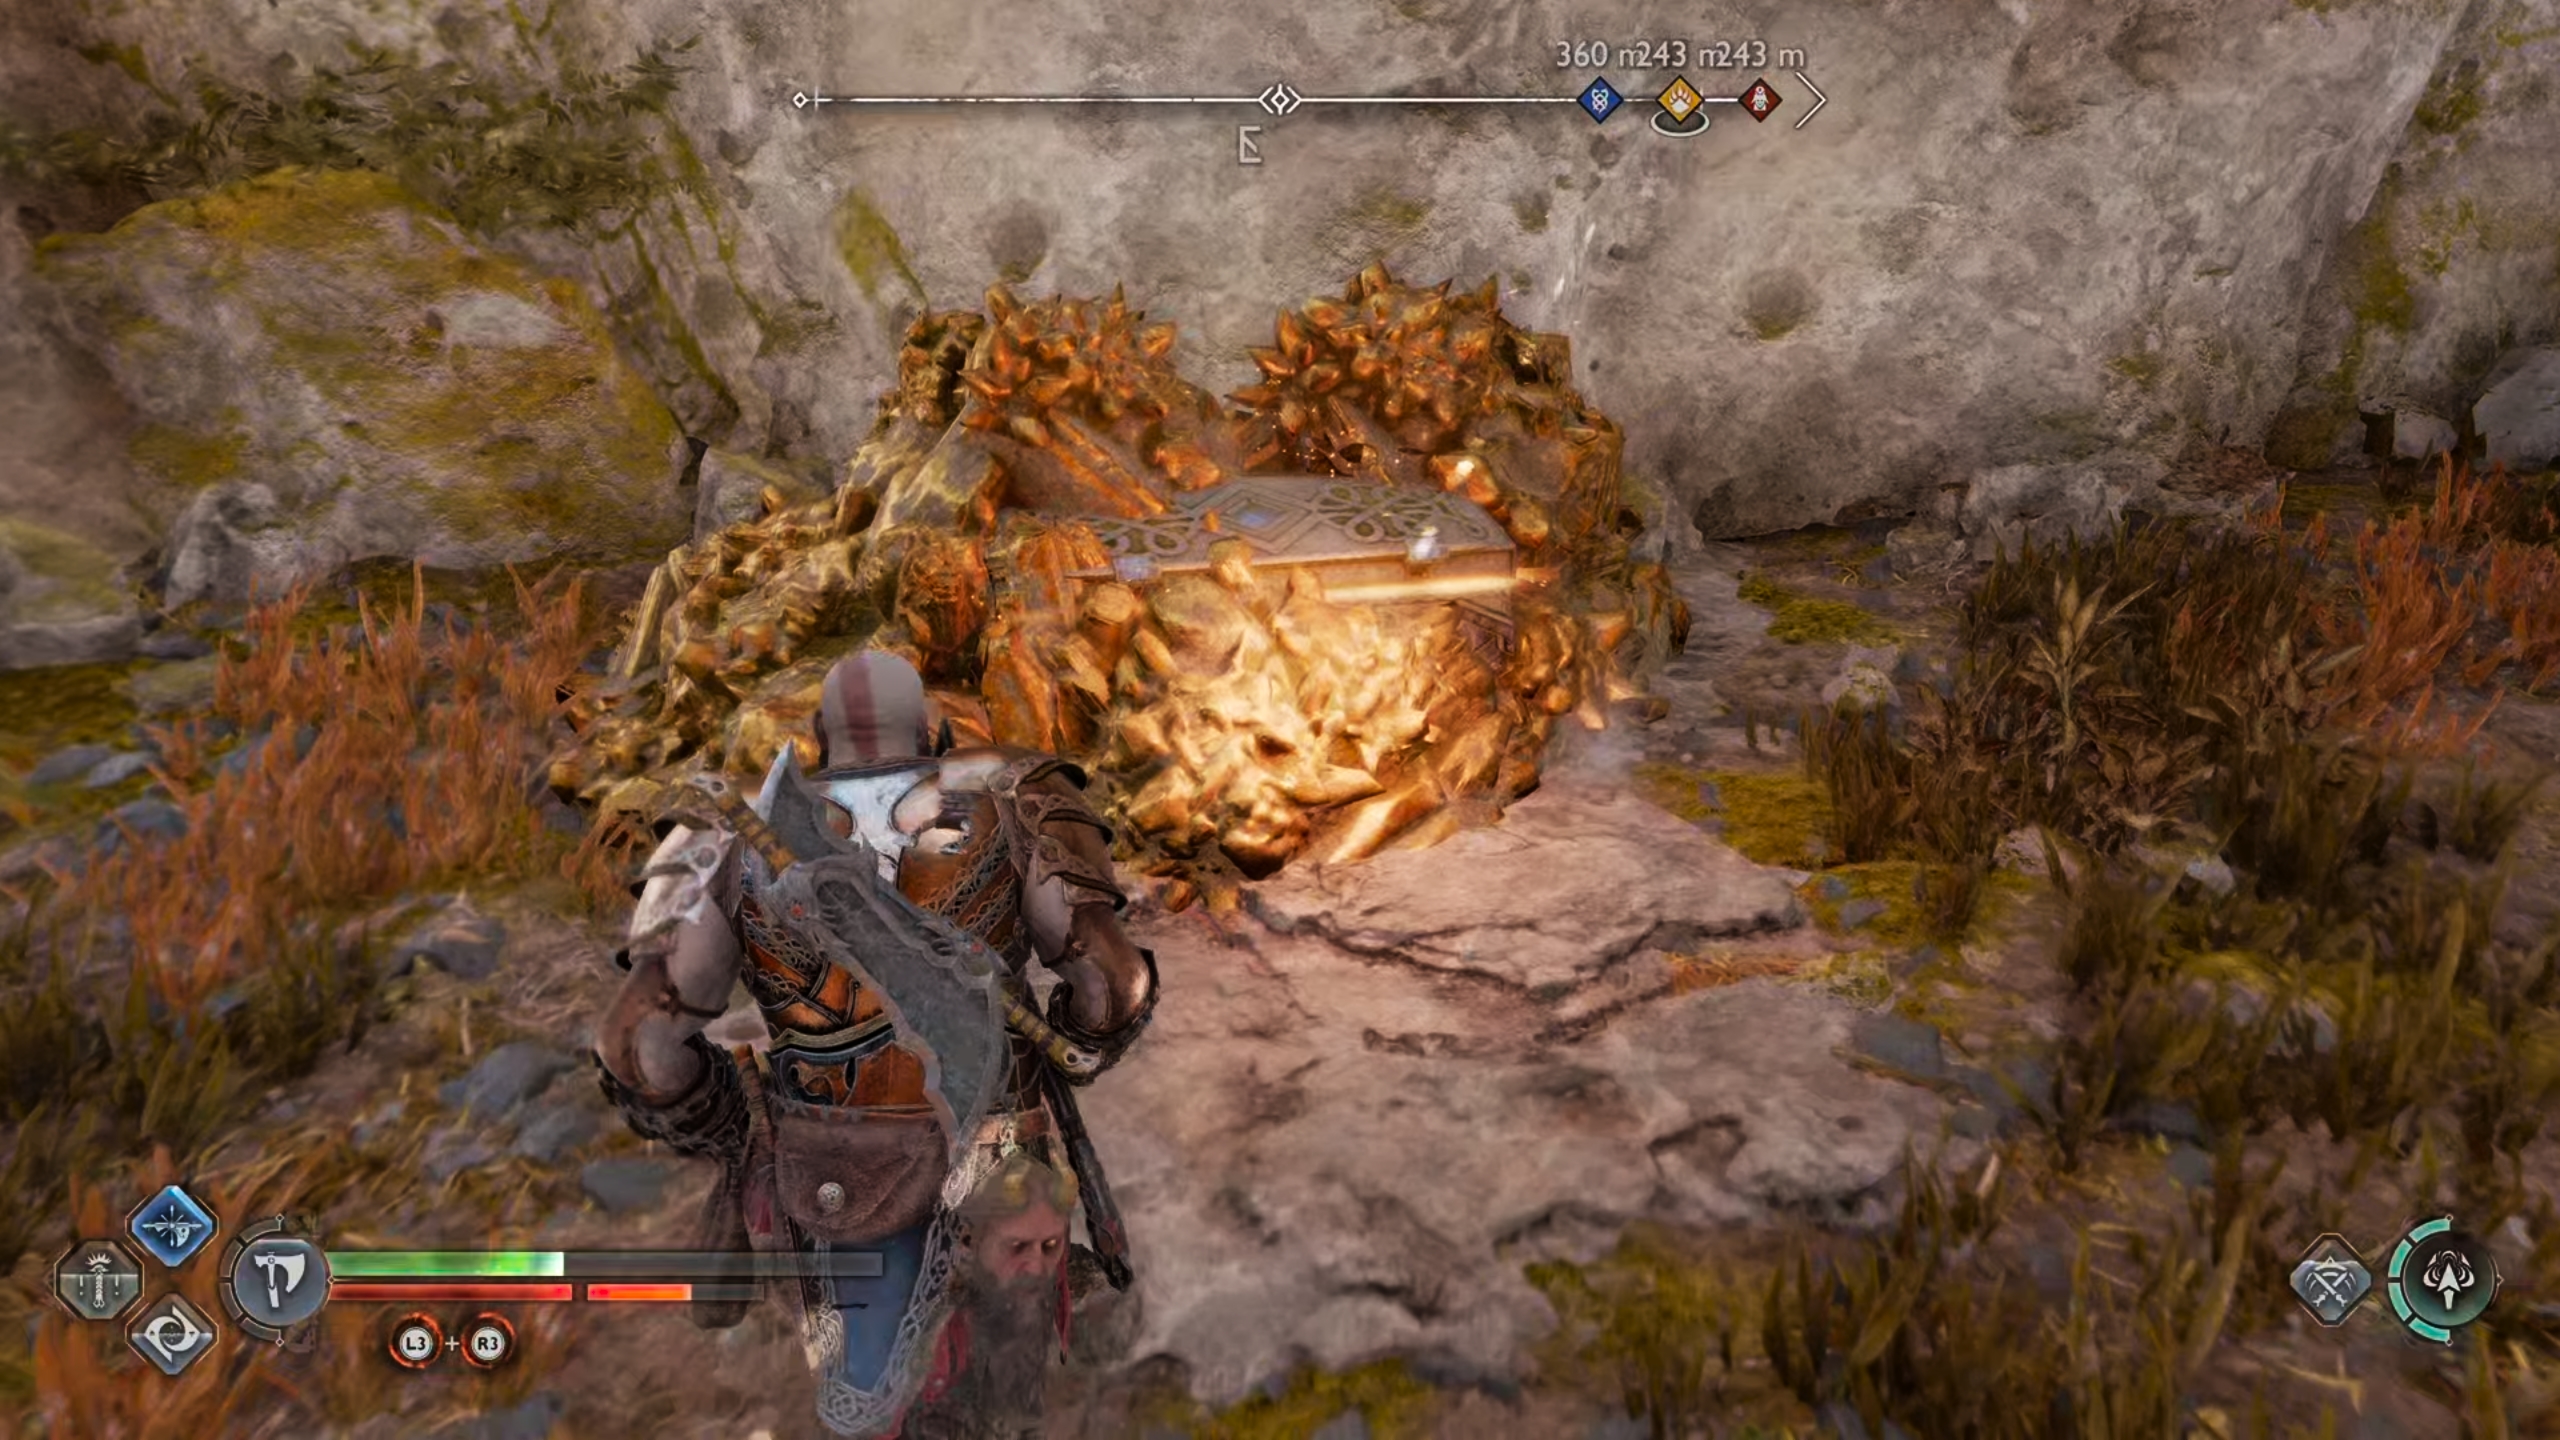 Loot this chest after destroying the gold around it to find the second half of the Muspelheim seed.